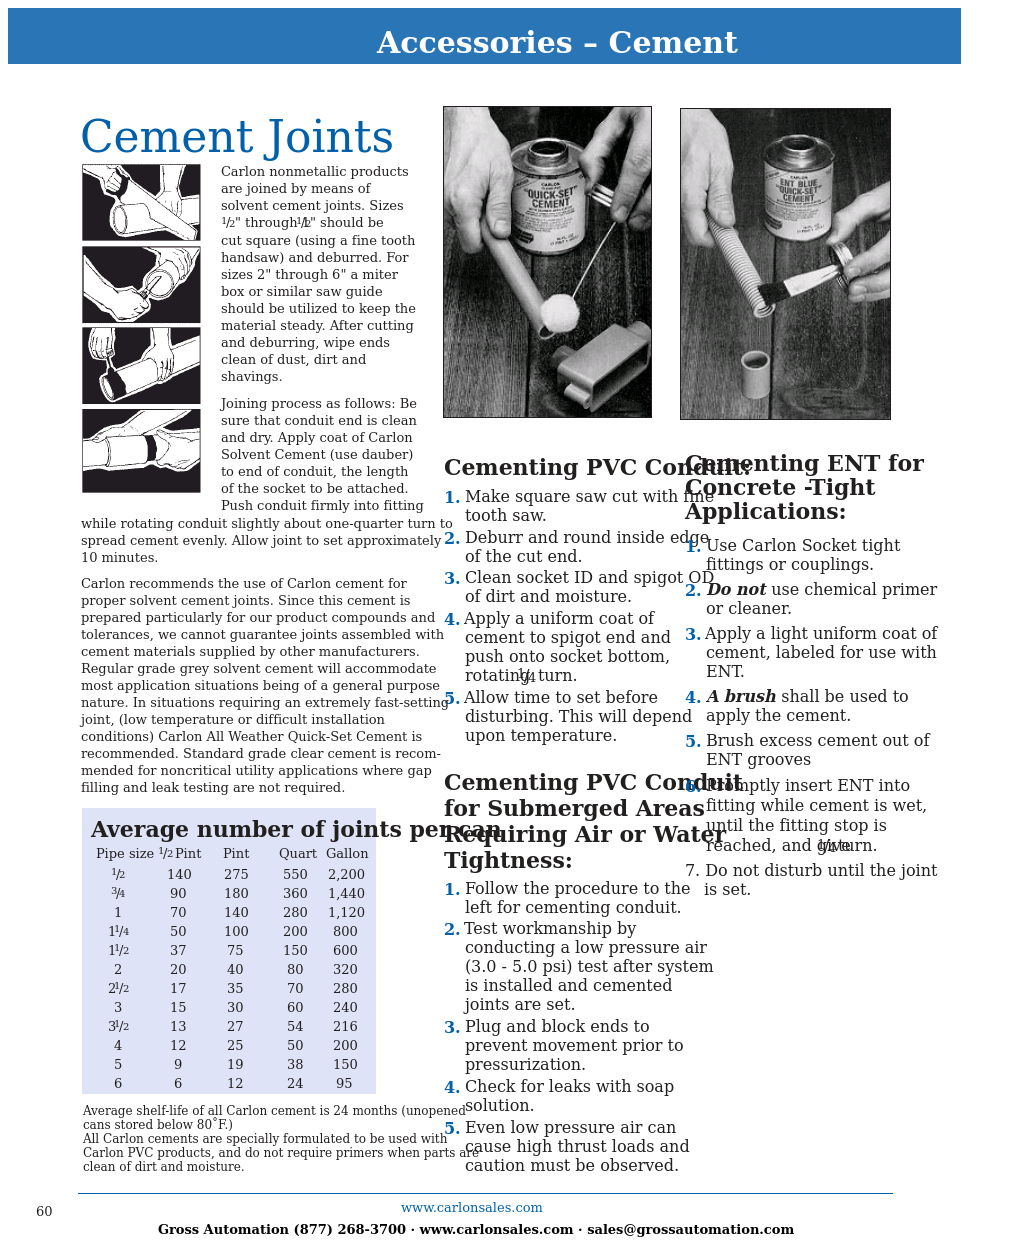 Cementing Joints - Low Res